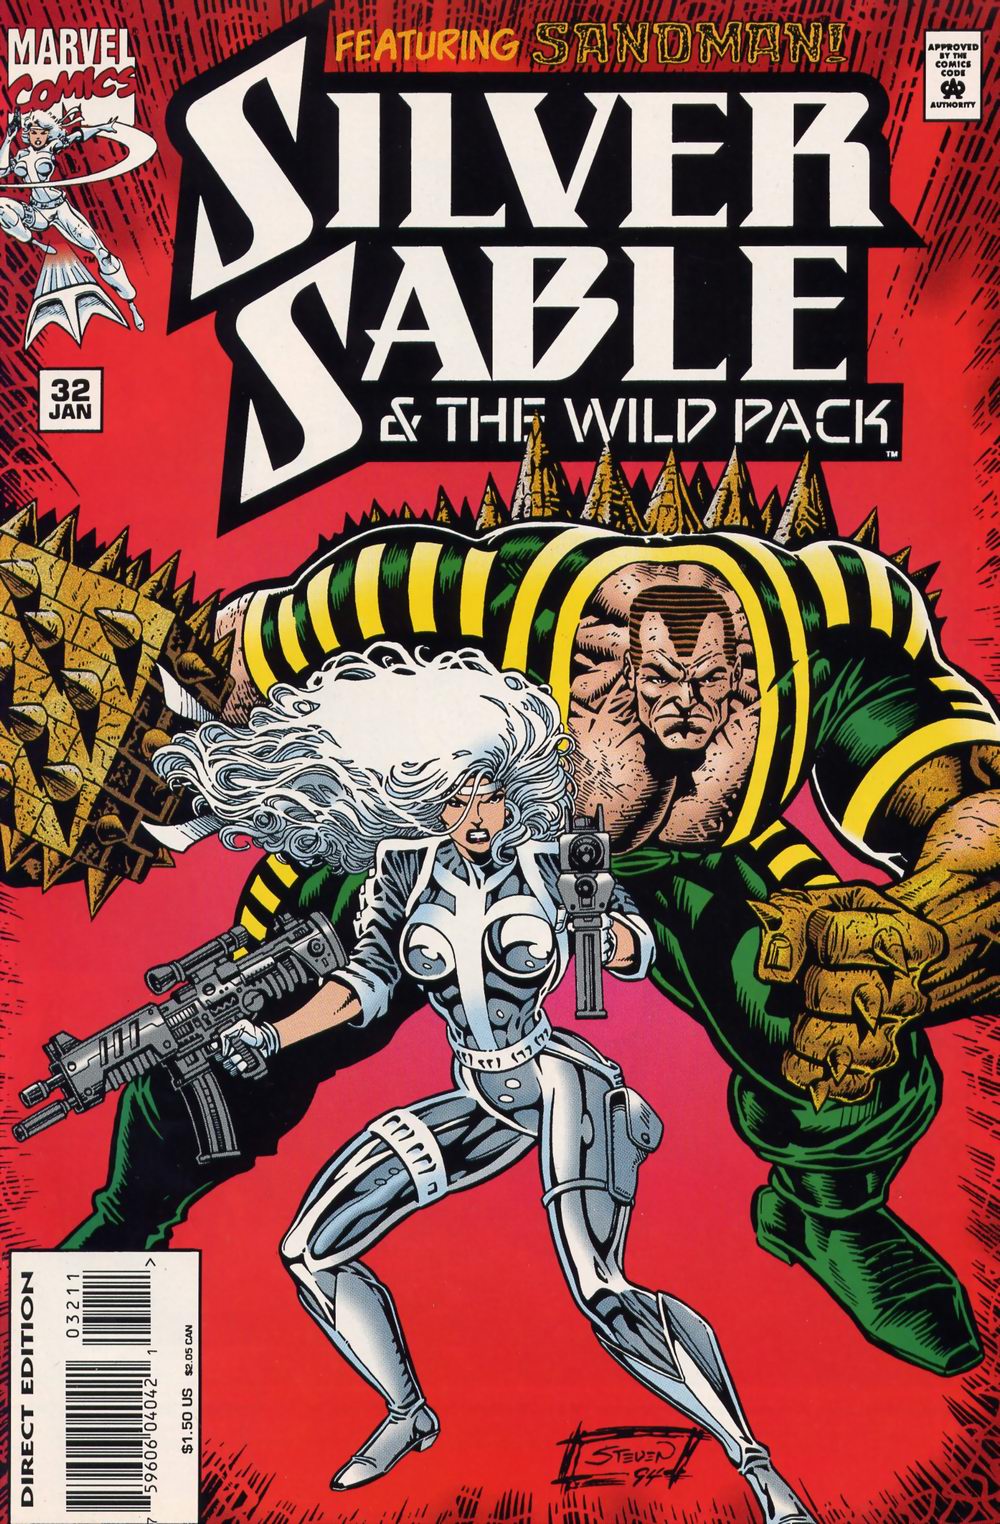 Read online Silver Sable and the Wild Pack comic -  Issue #32 - 1